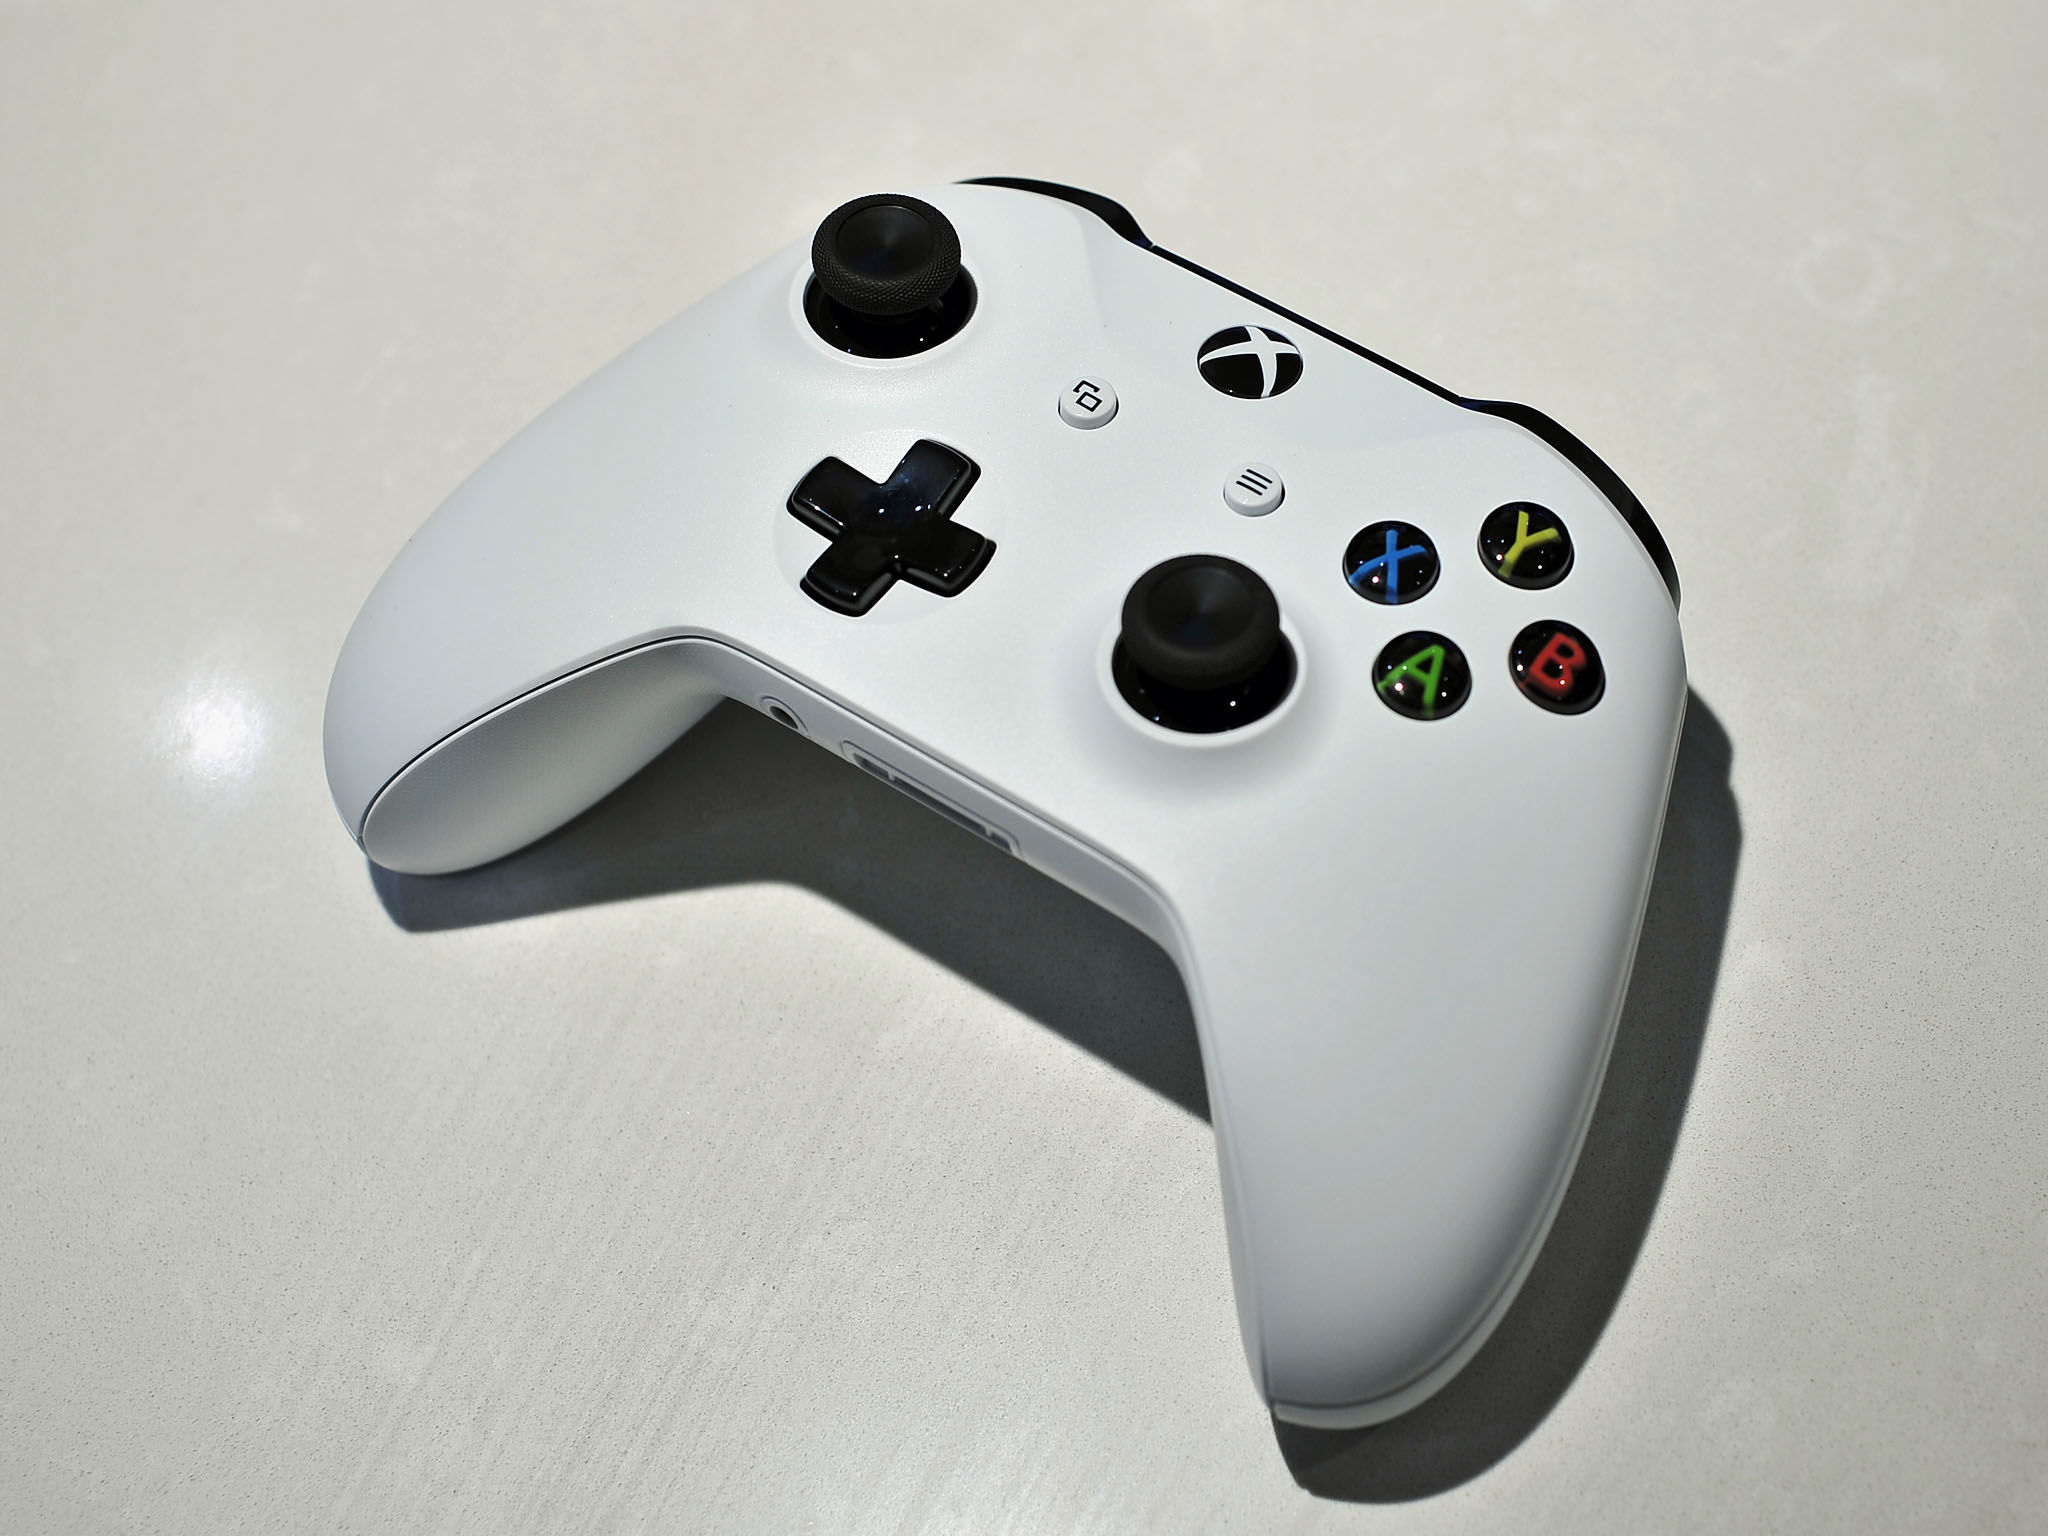 The new Xbox One white controller is yours for only £39 